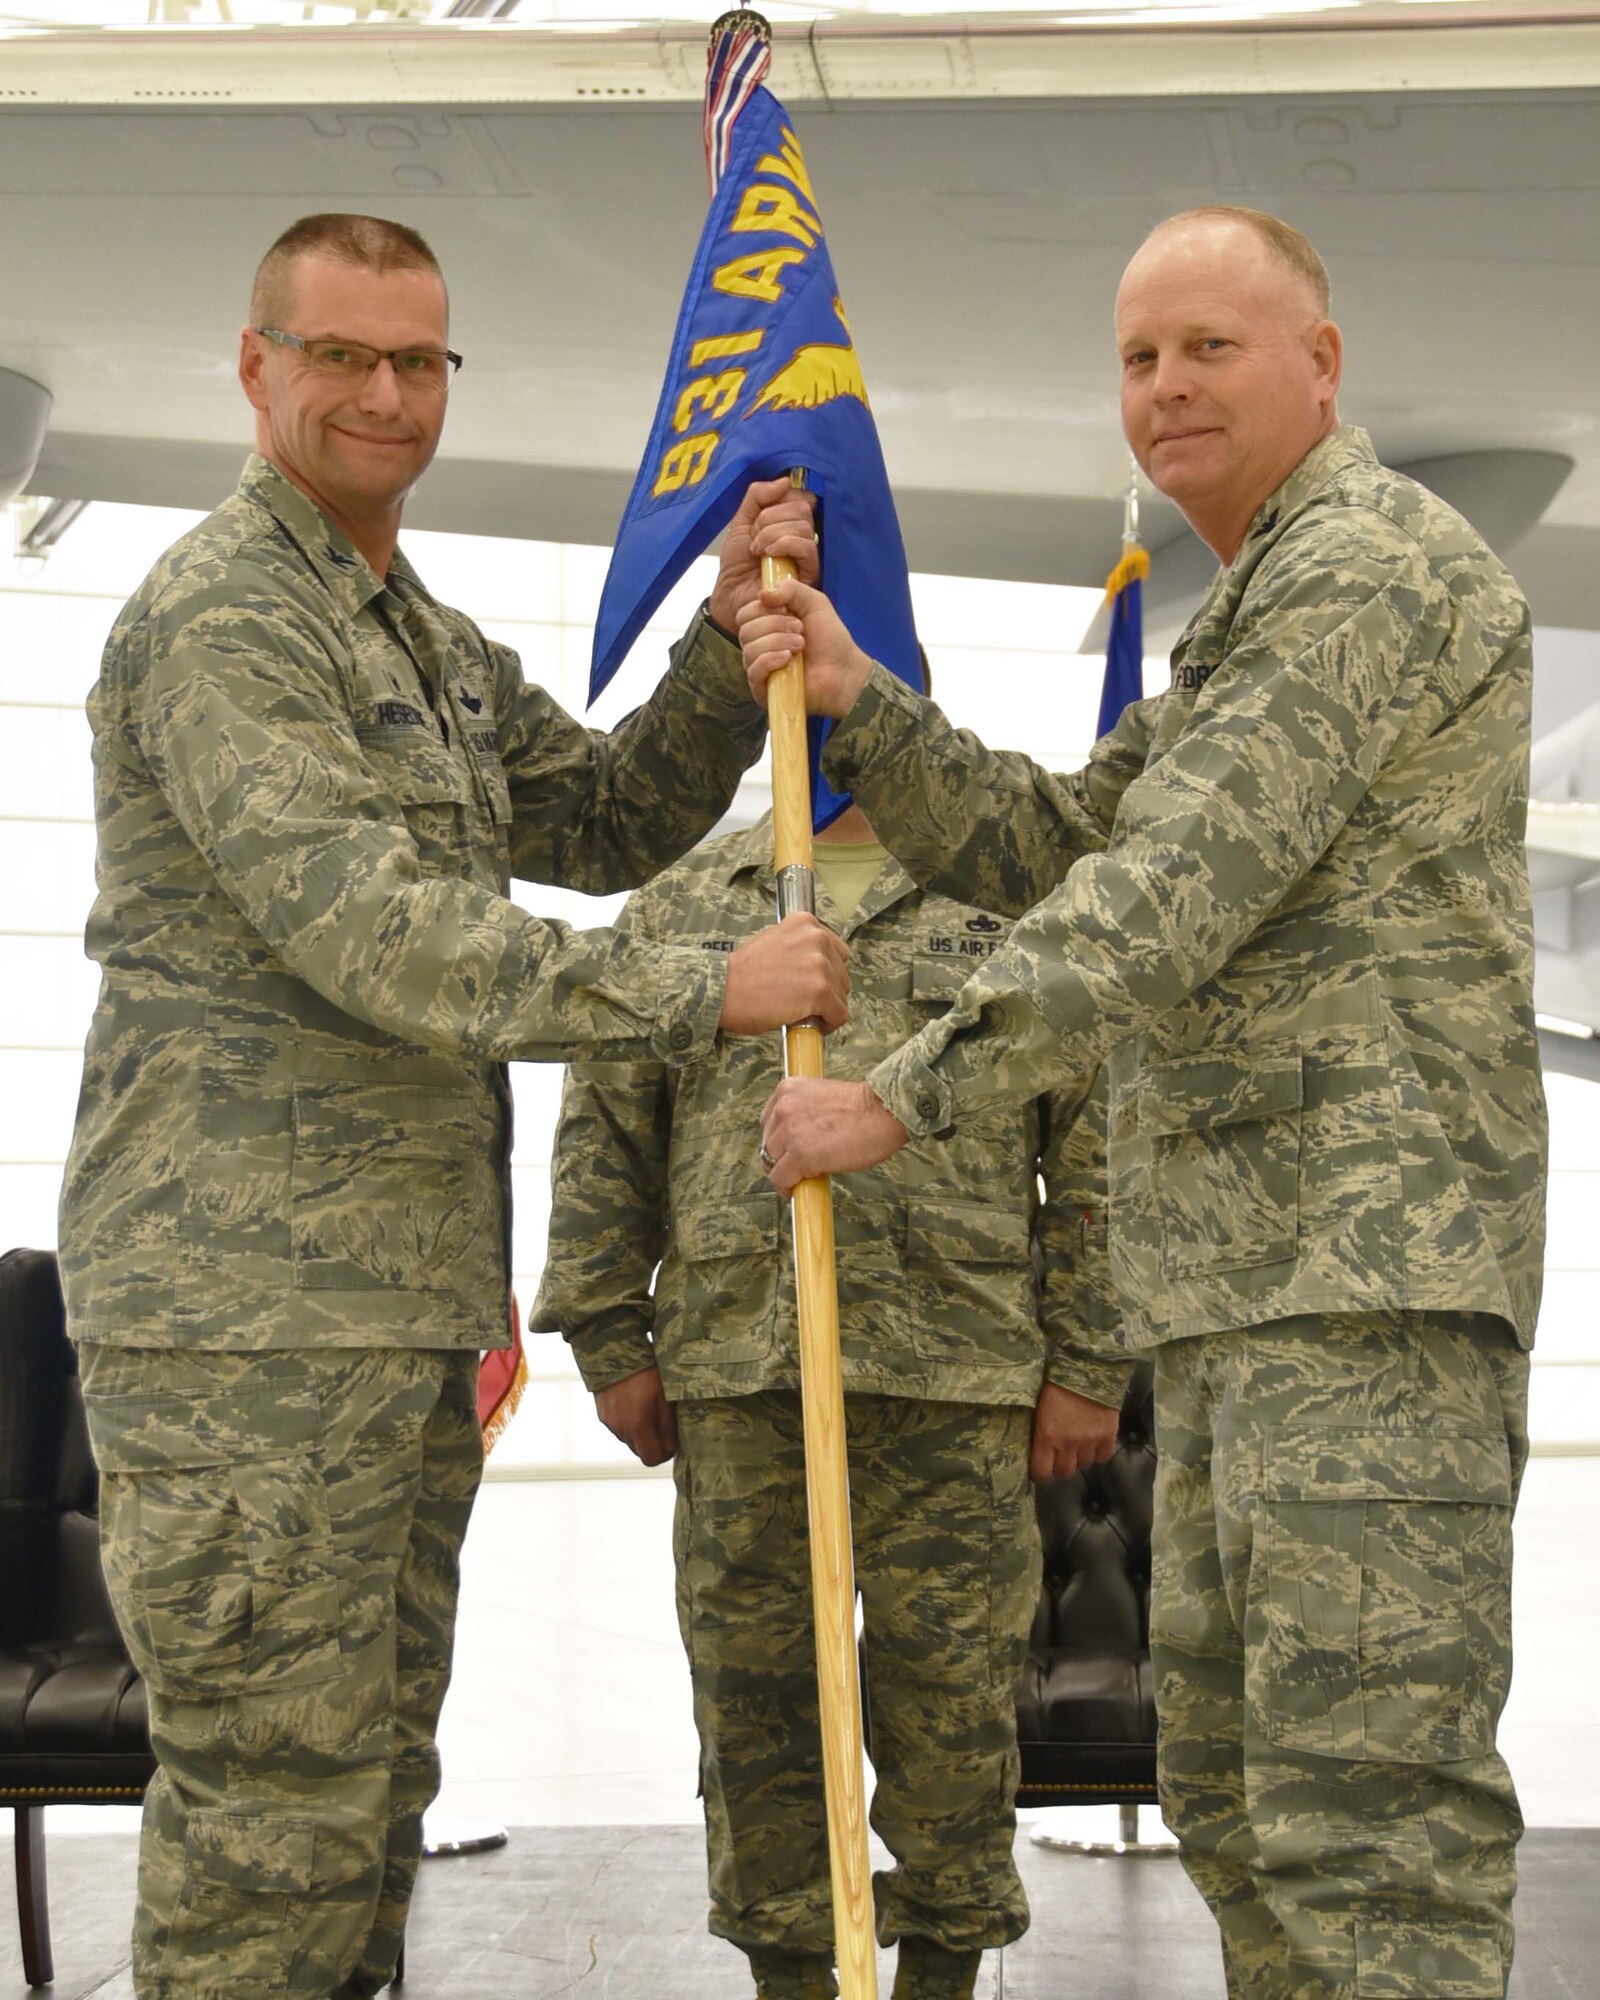 (Left to right) Col. Phil Heseltine, 931st Air Refueling Wing commander, takes the guidon from Col. Heath Fowler, the outgoing 931st Maintenance Group commander, during an official change of command ceremony, Feb. 3, 2019, McConnell Air Force Base, Kan. Fowler was the first commander of the 931 MXG, which stood up in 2016.